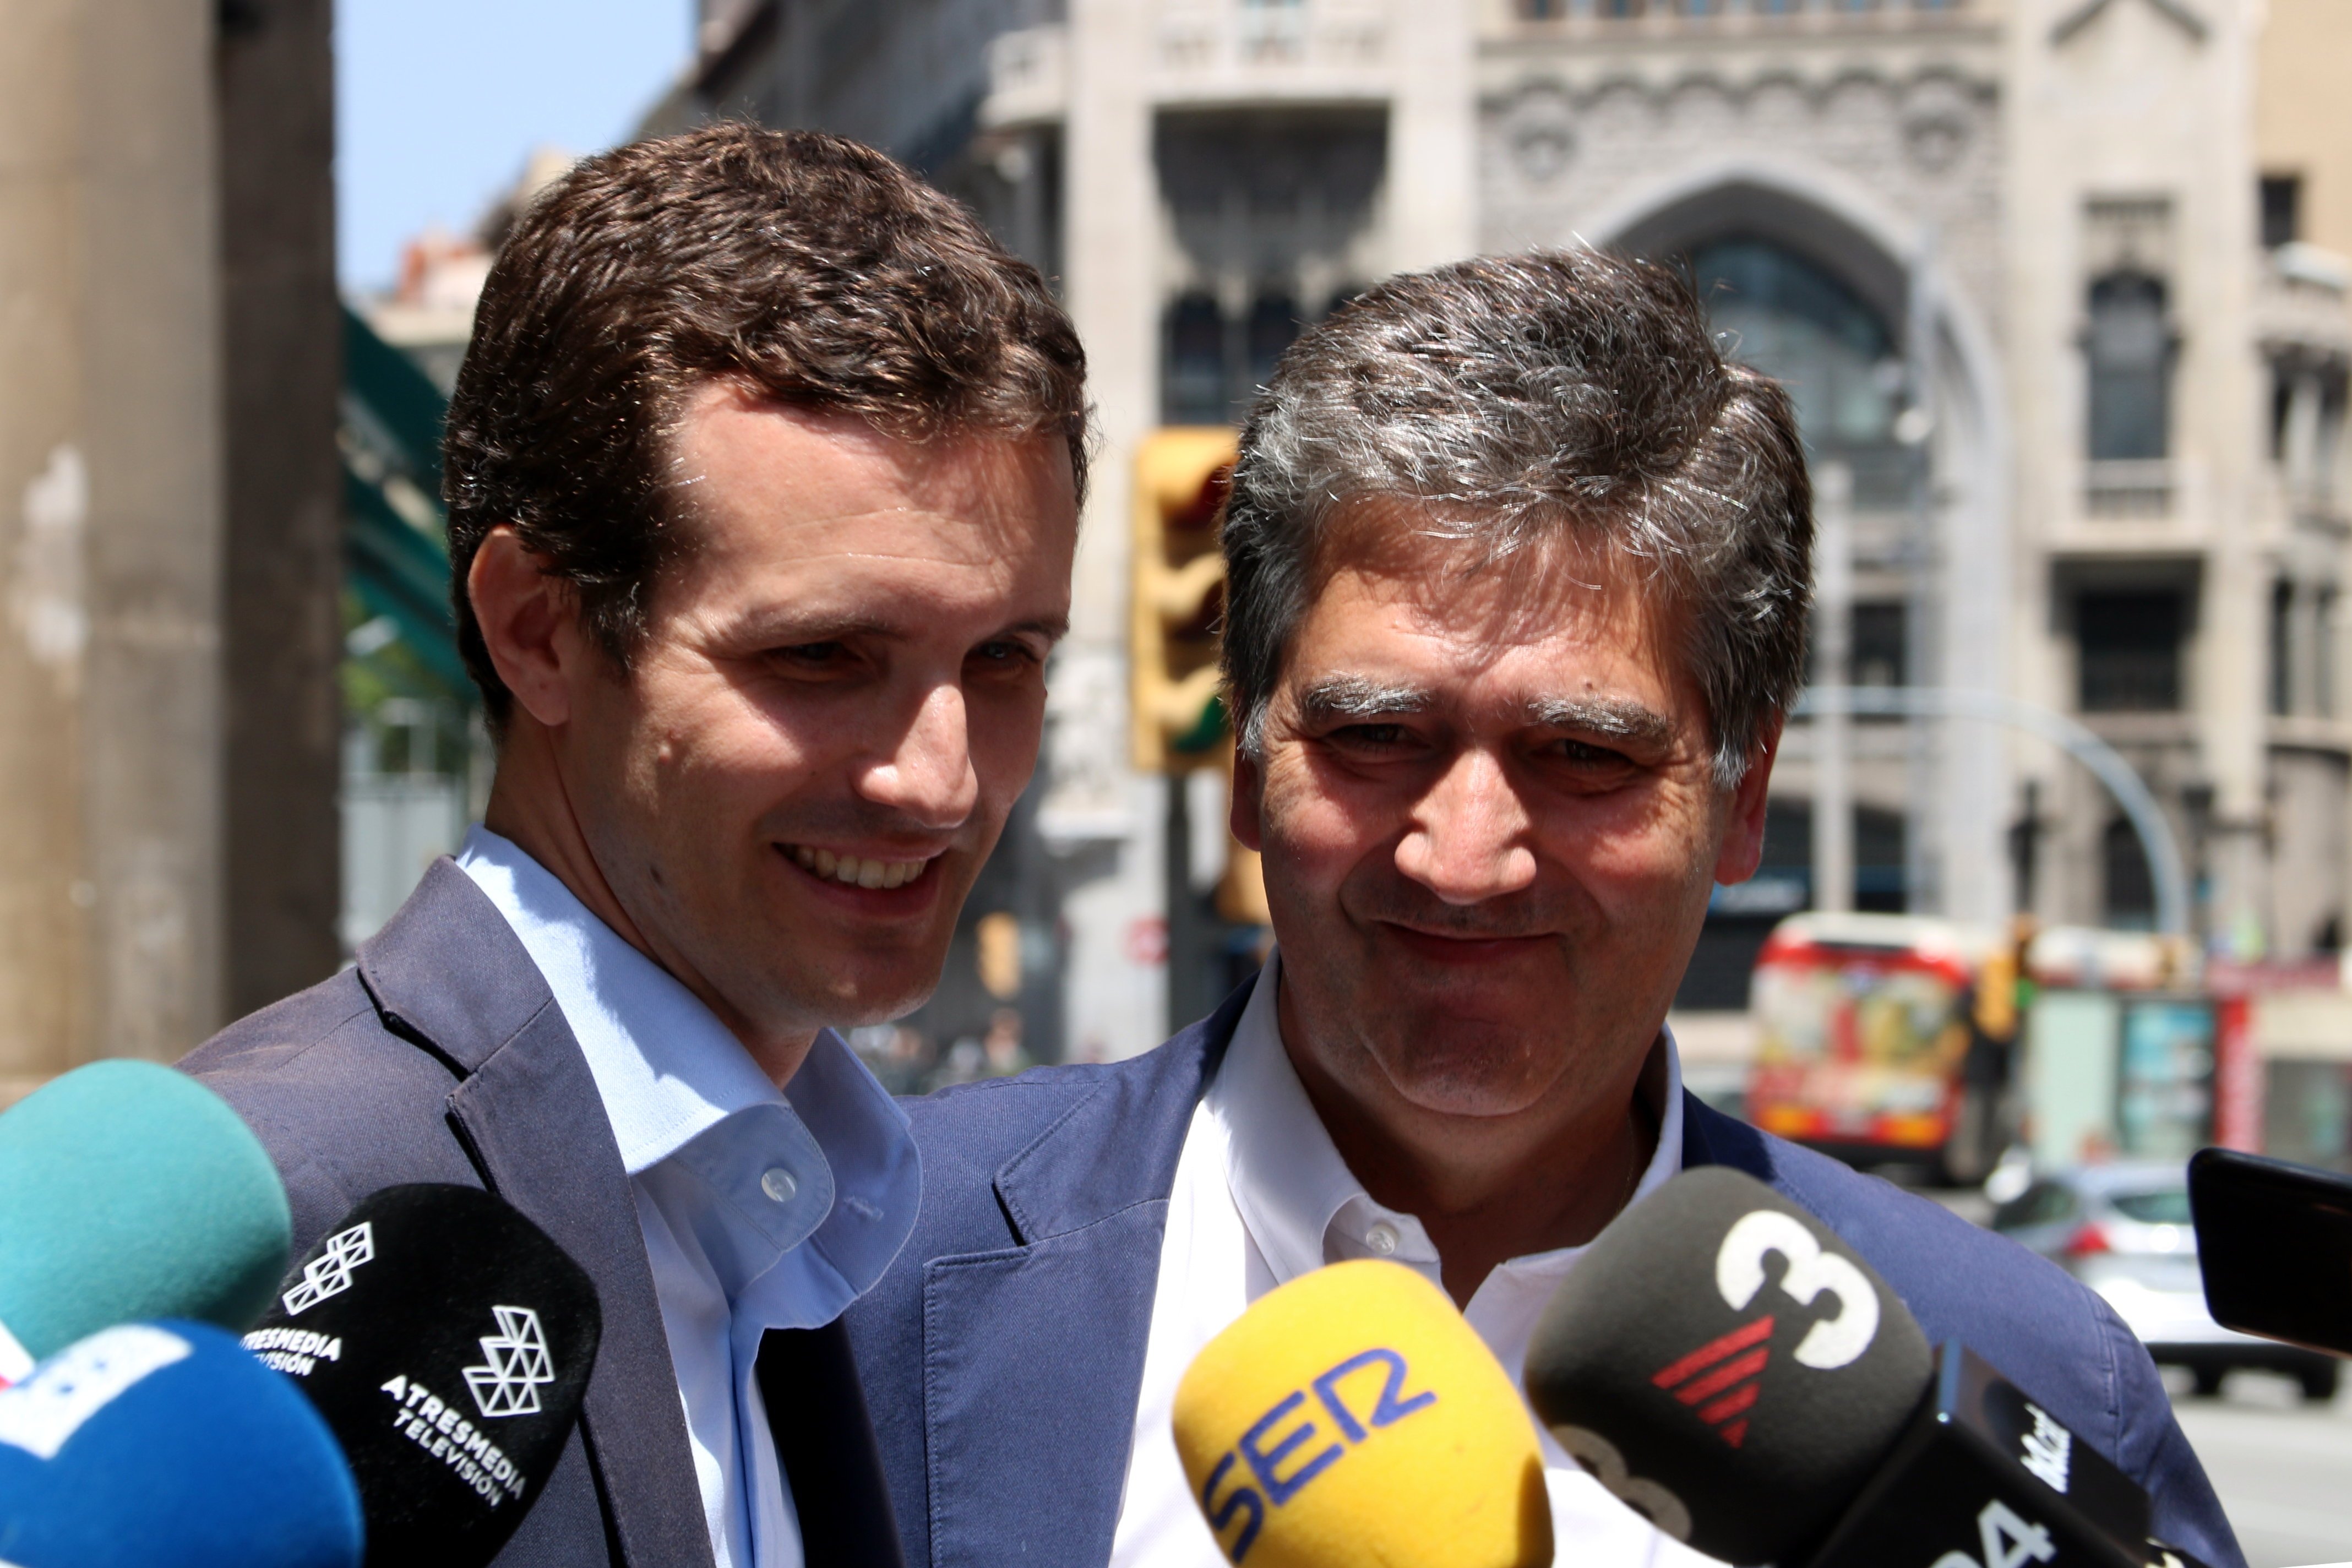 Casado suggests that pro-independence Catalans should leave the country